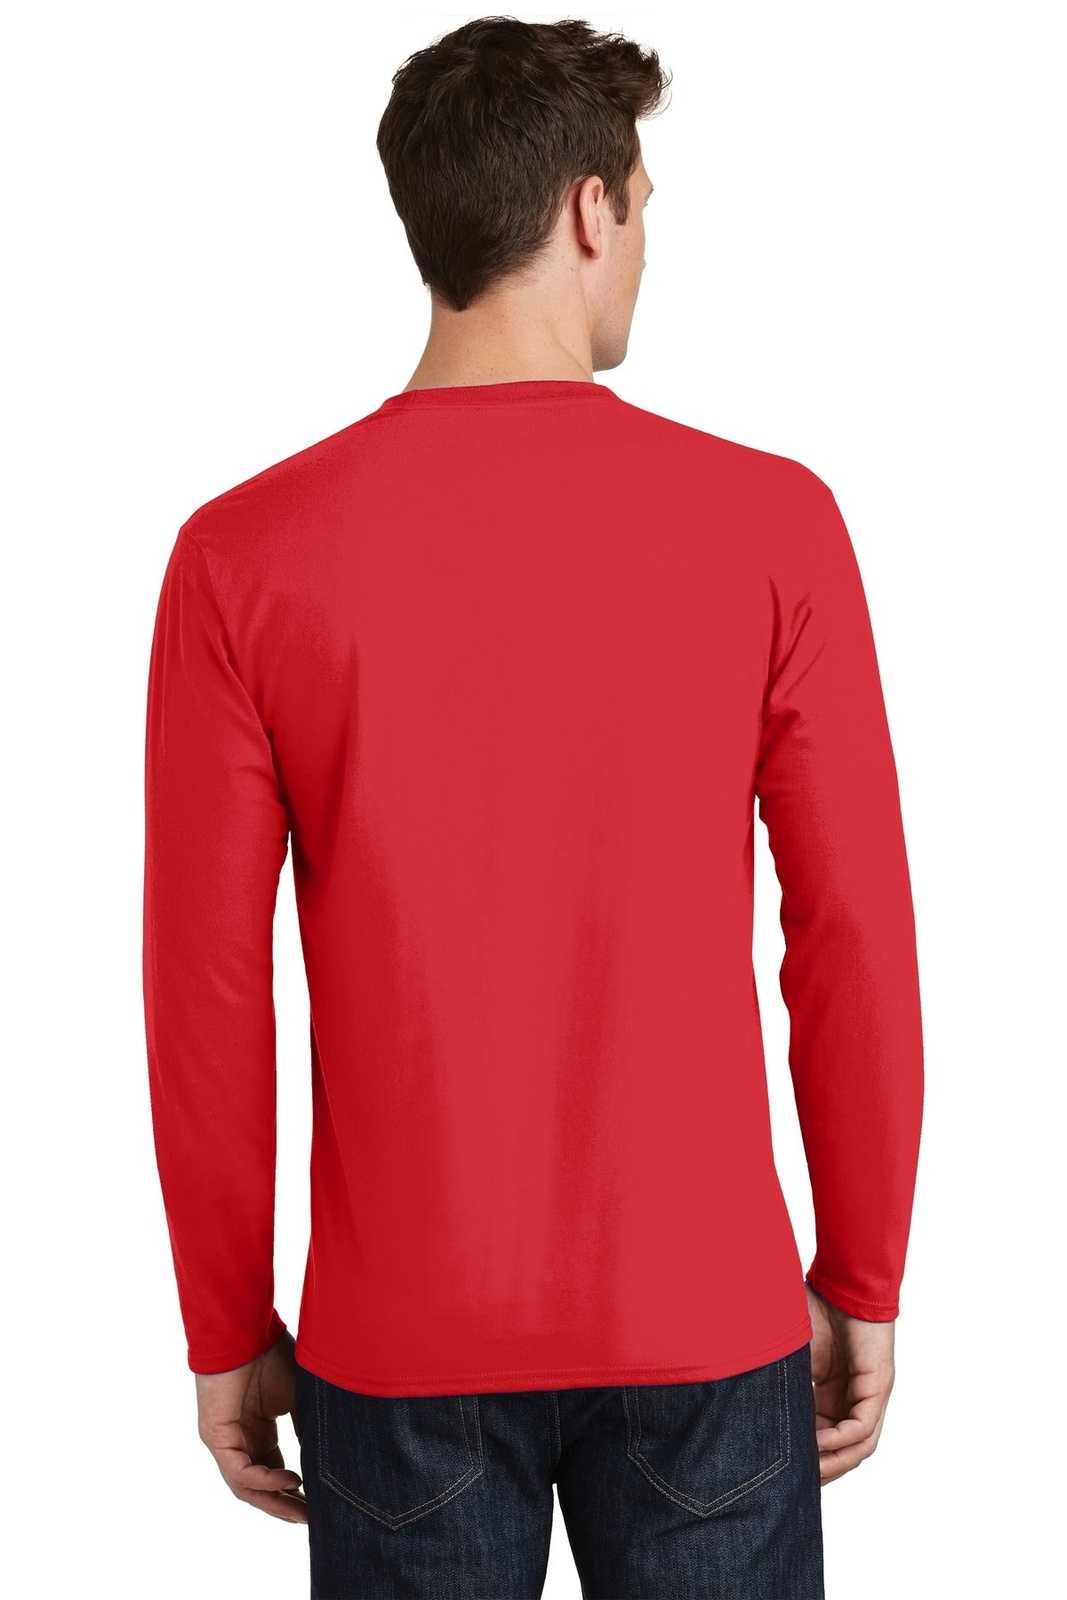 Port & Company PC450LS Long Sleeve Fan Favorite Tee - Bright Red - HIT a Double - 1